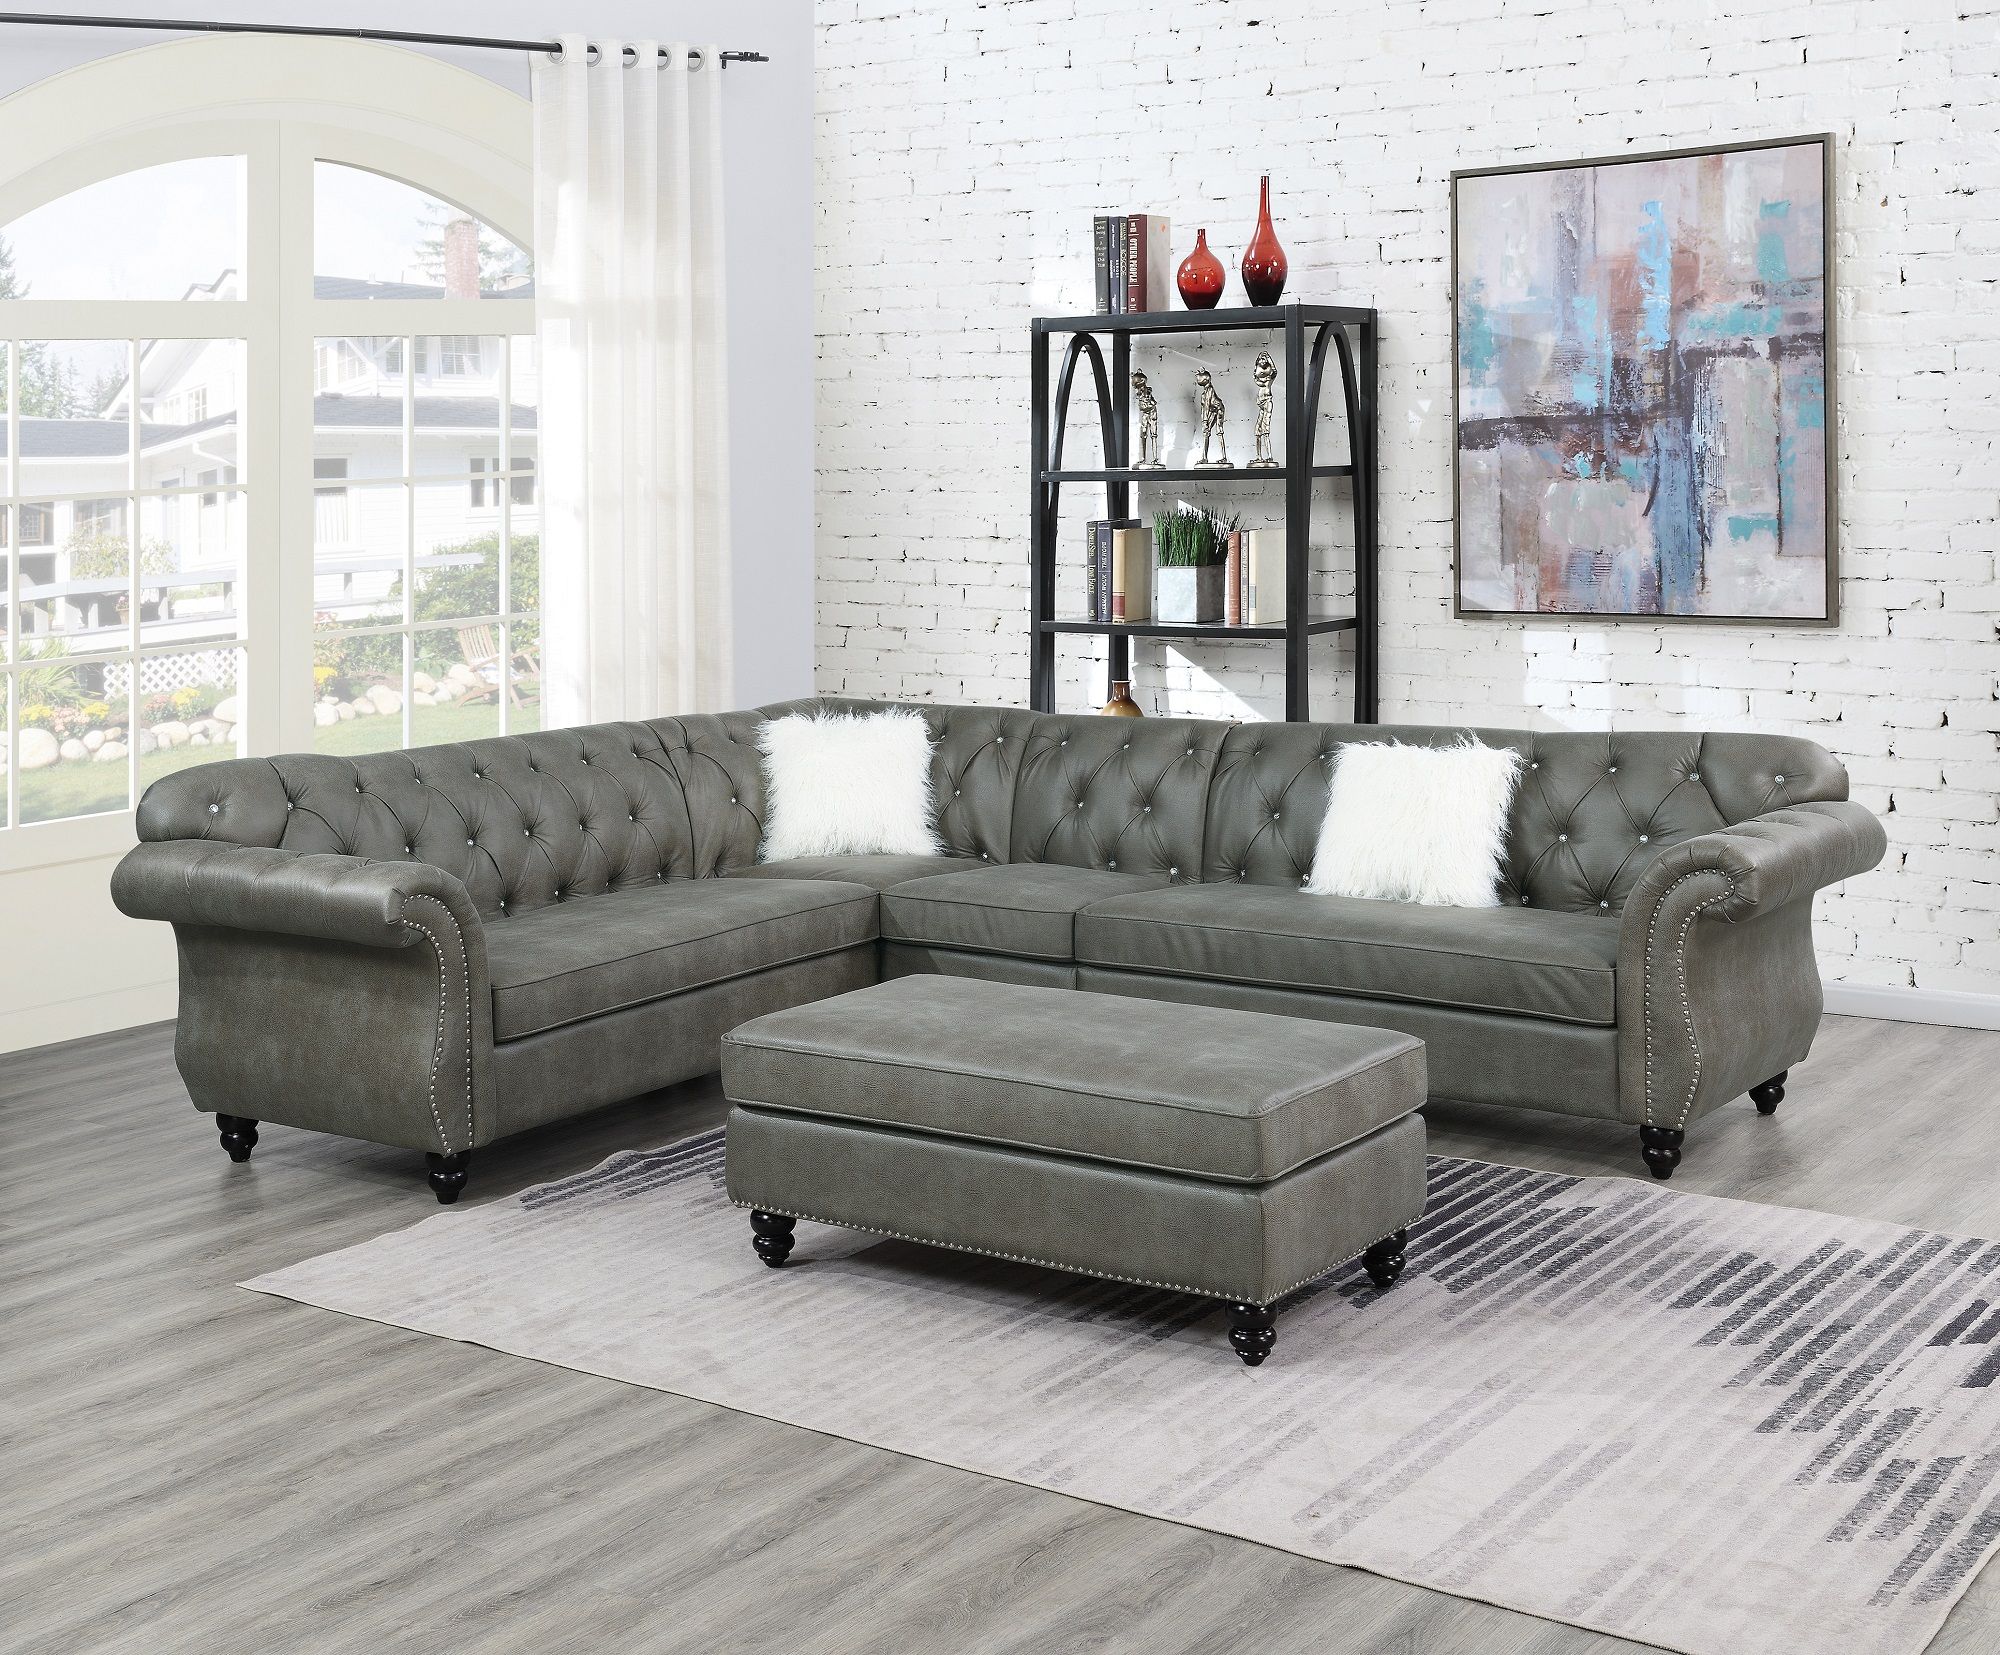 Contemporary Modern Living Room Sectional Sofa Set Slate Regarding 4pc Beckett Contemporary Sectional Sofas And Ottoman Sets (View 2 of 15)